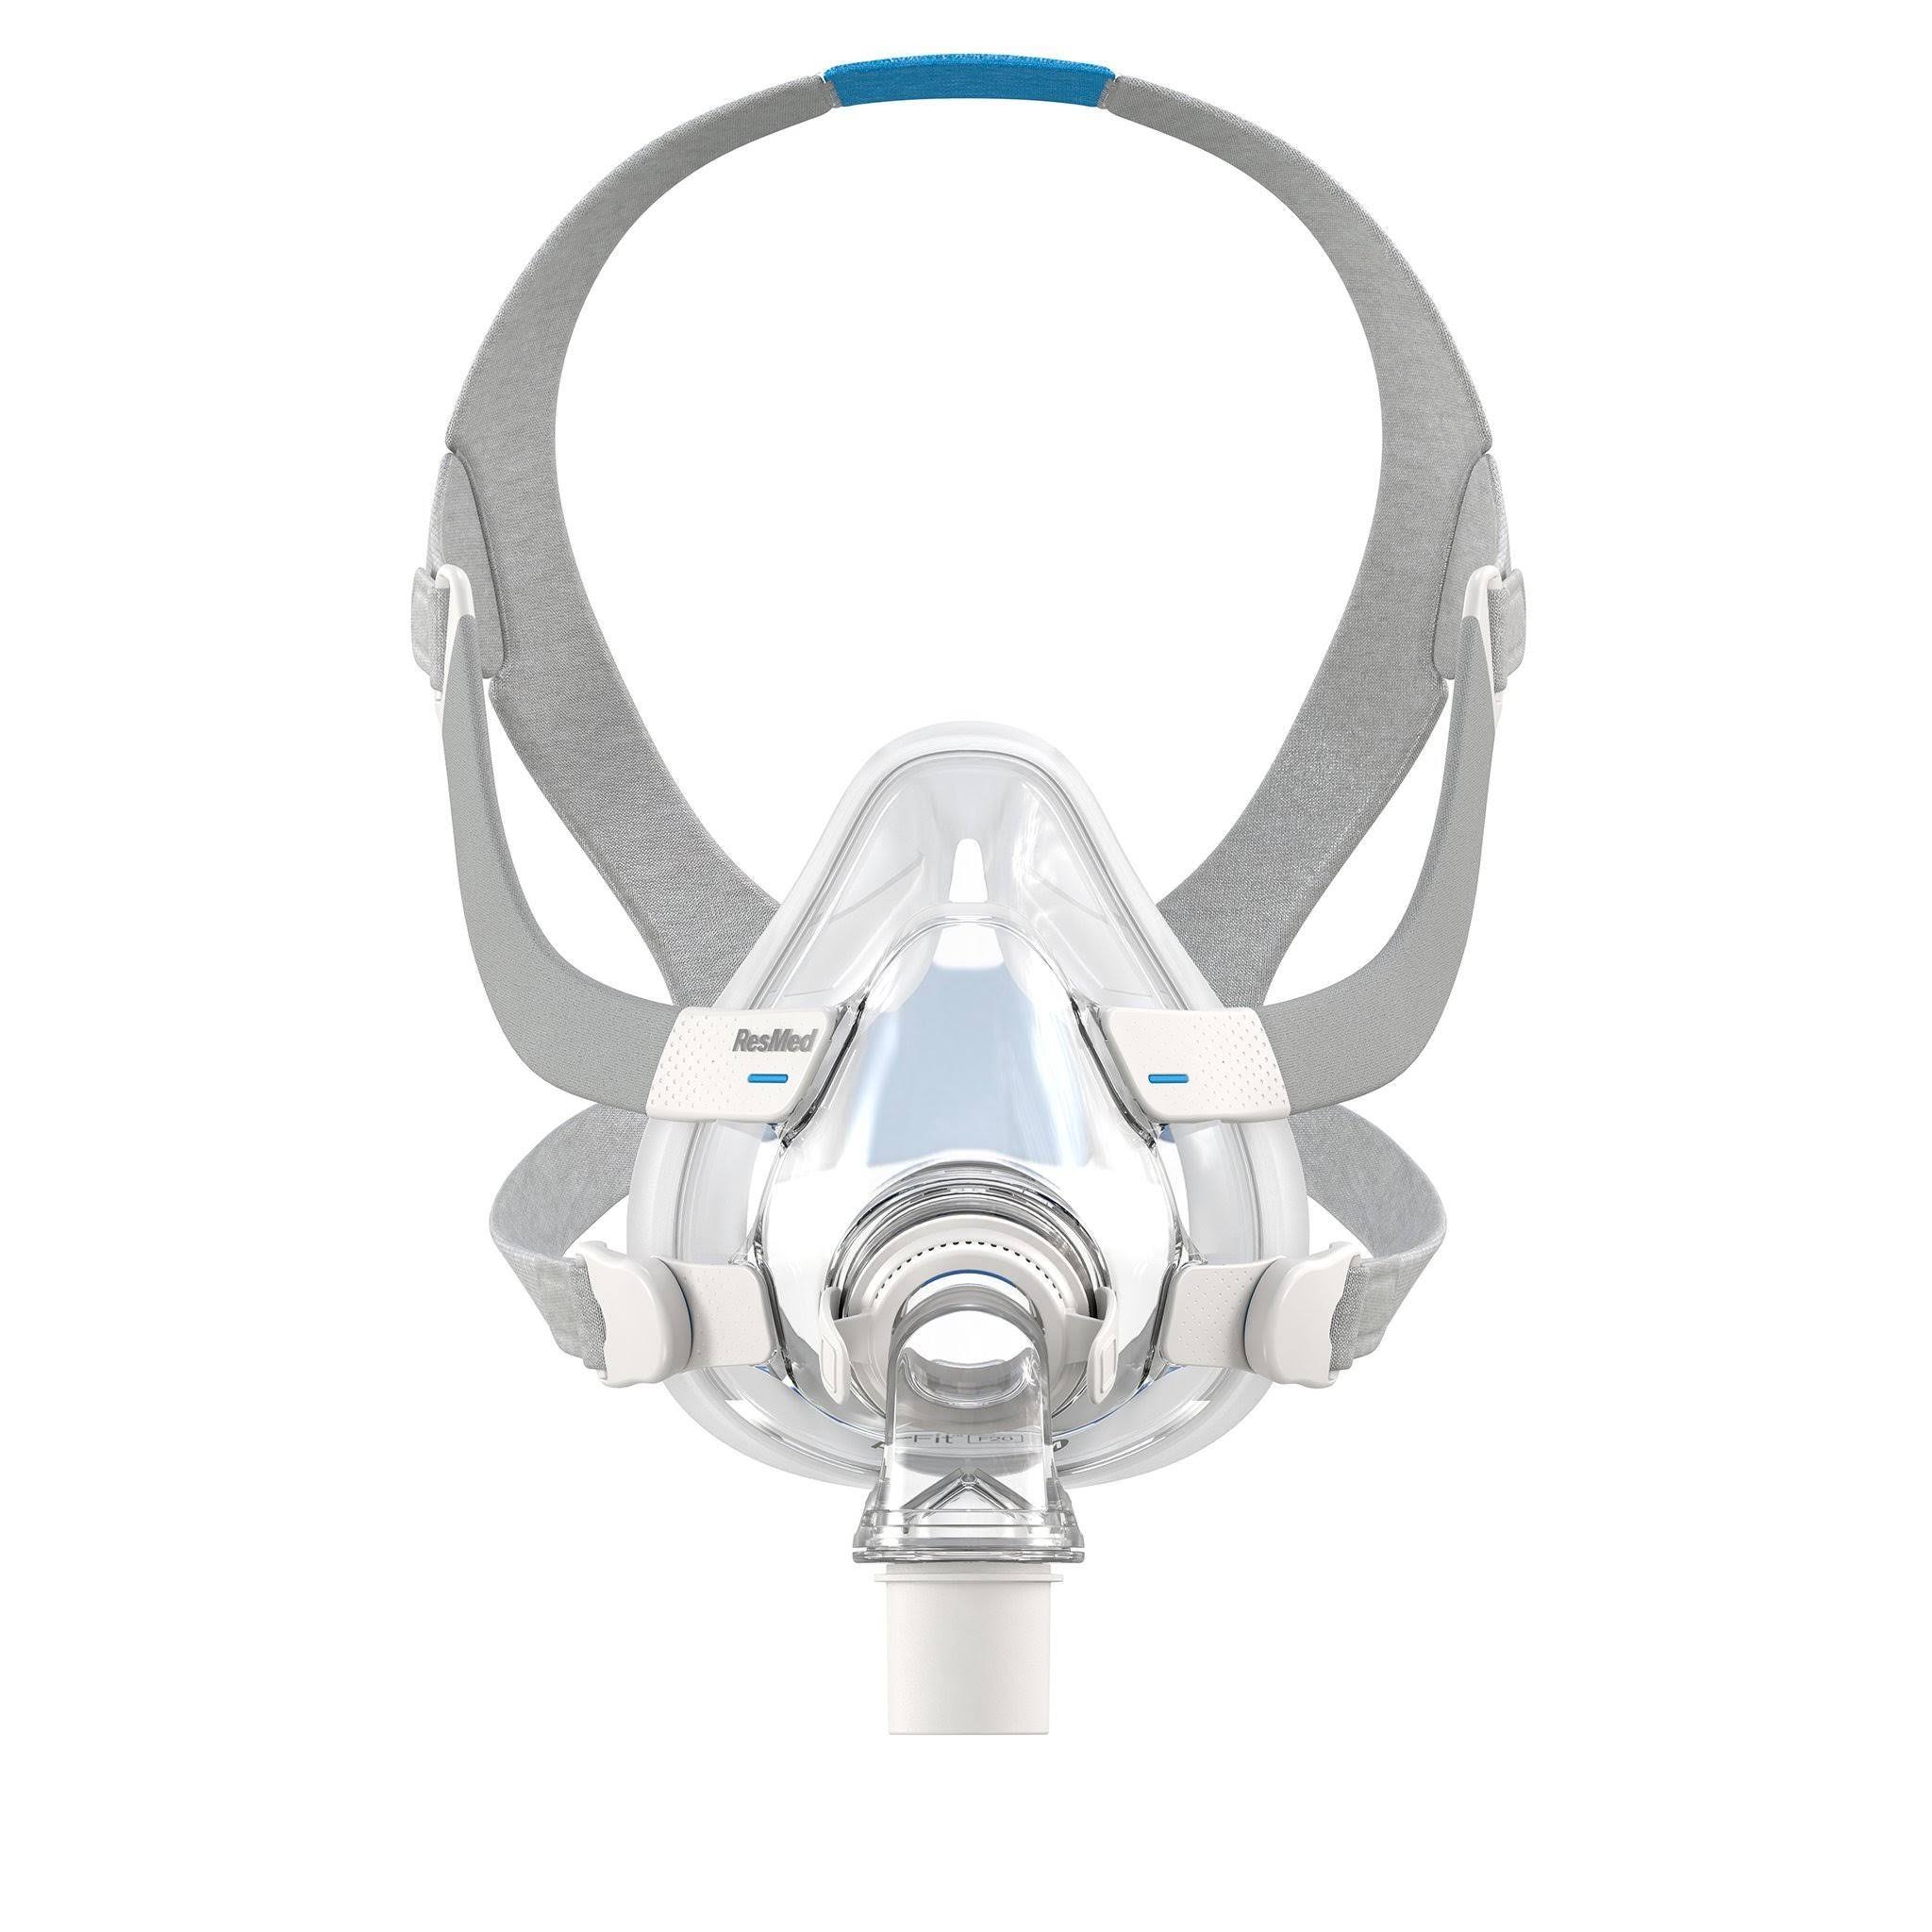 ResMed Airfit F20 Full Face CPAP Mask and Headgear Kit - All Sizes